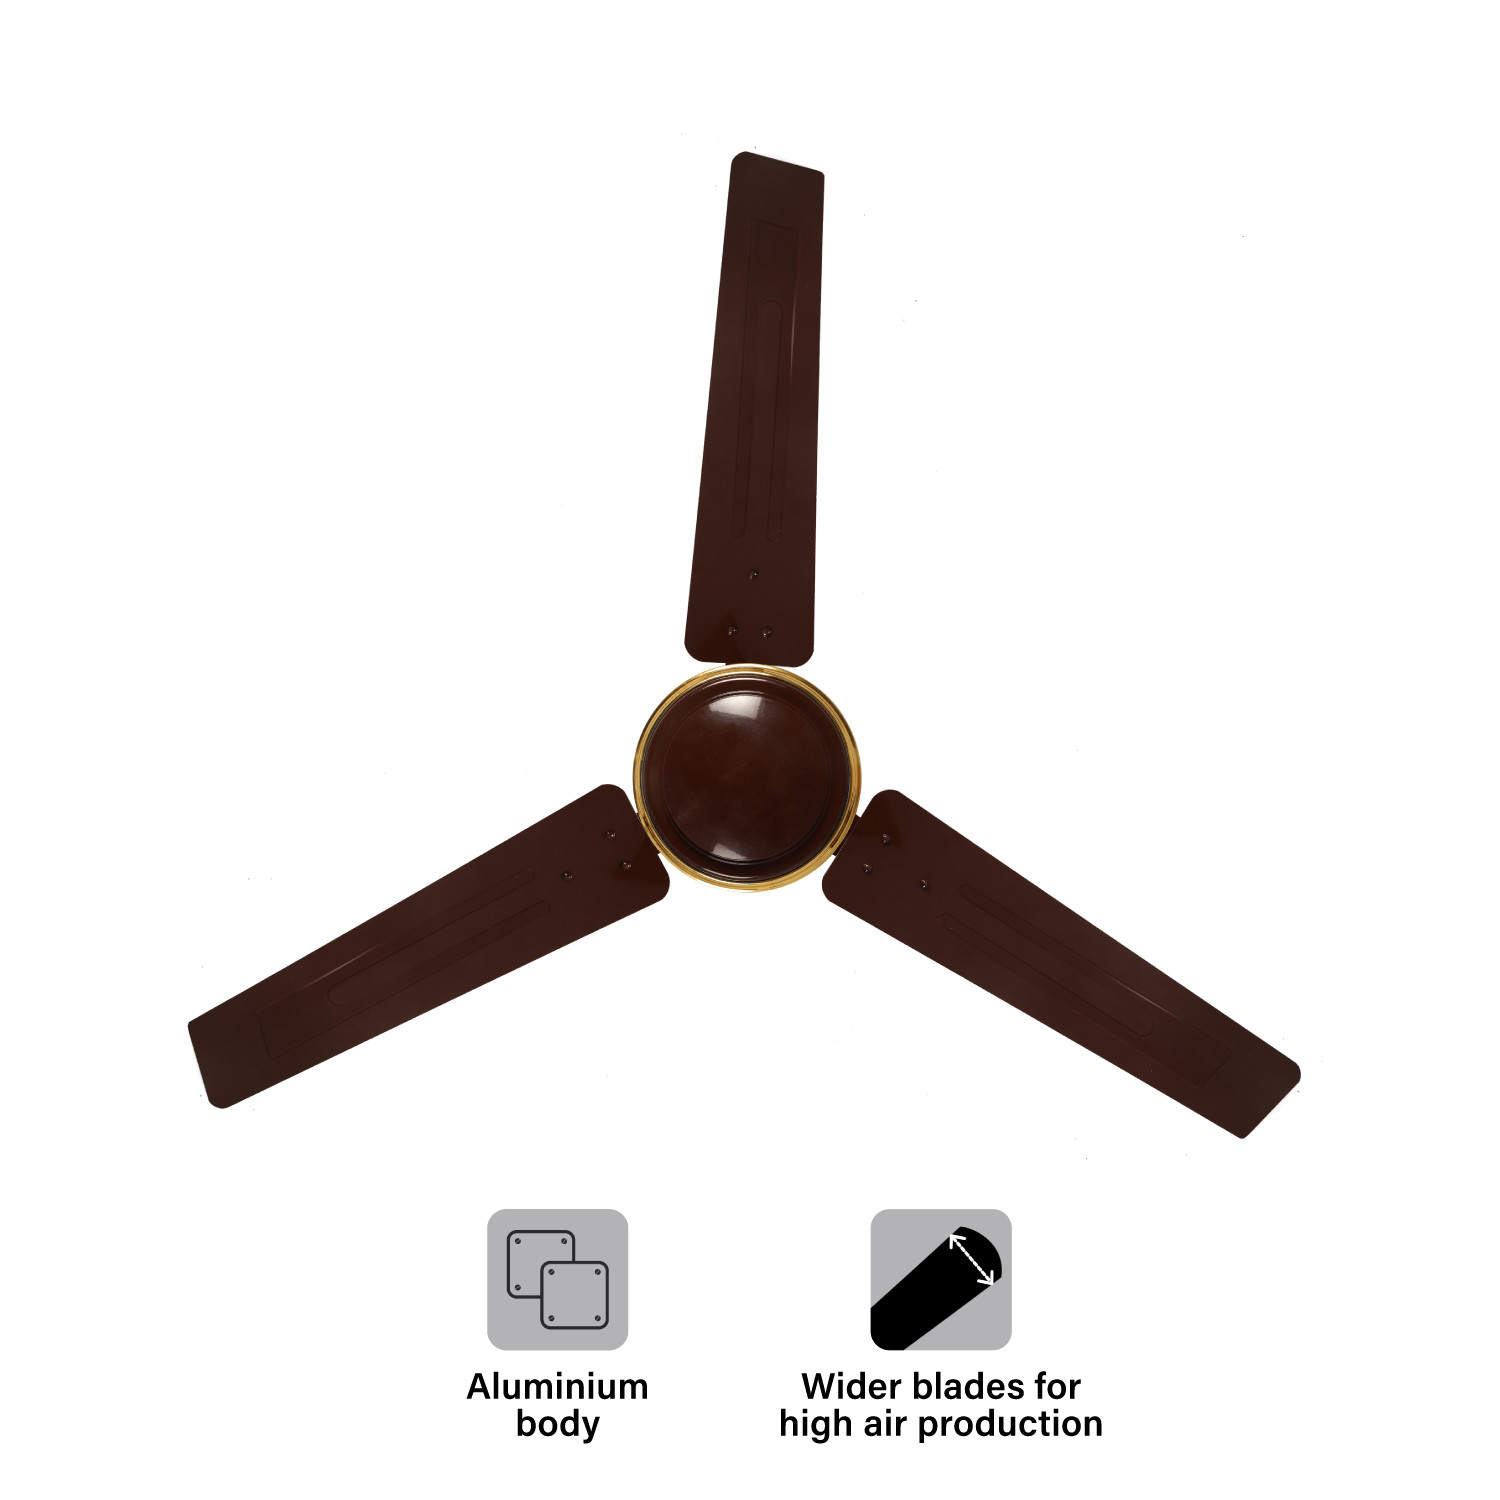 VG Star Breeze 1200 mm 3 Blade Ceiling Fan  (Cherry Red, Pack of 1)